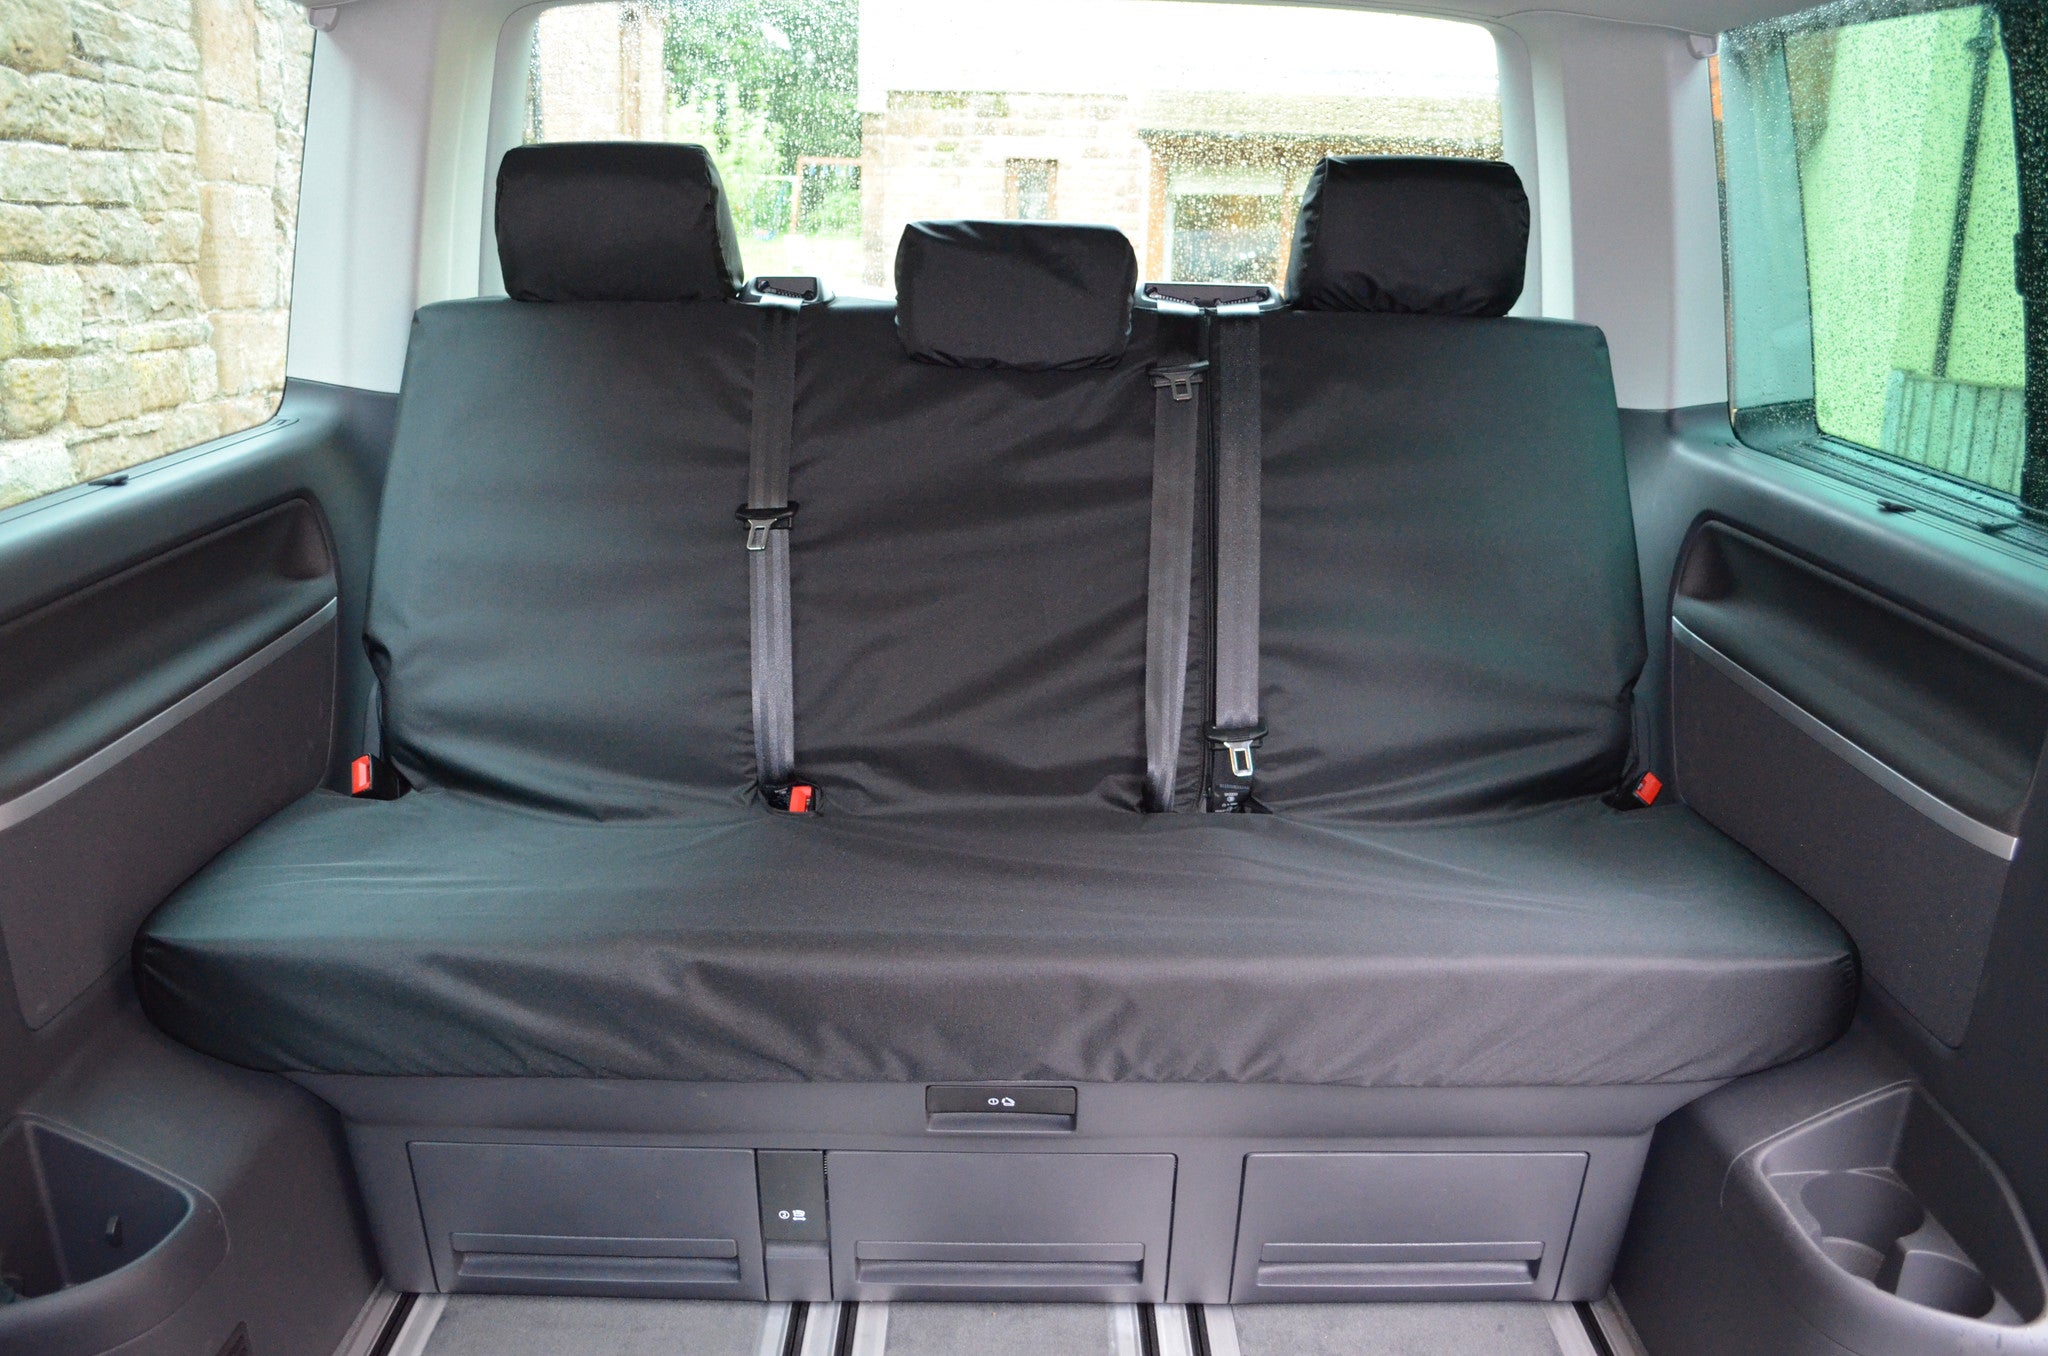 VW Volkswagen T5 Caravelle 2003 - 2015 Tailored Seat Covers Rear 3-Seater Bench / Black Turtle Covers Ltd